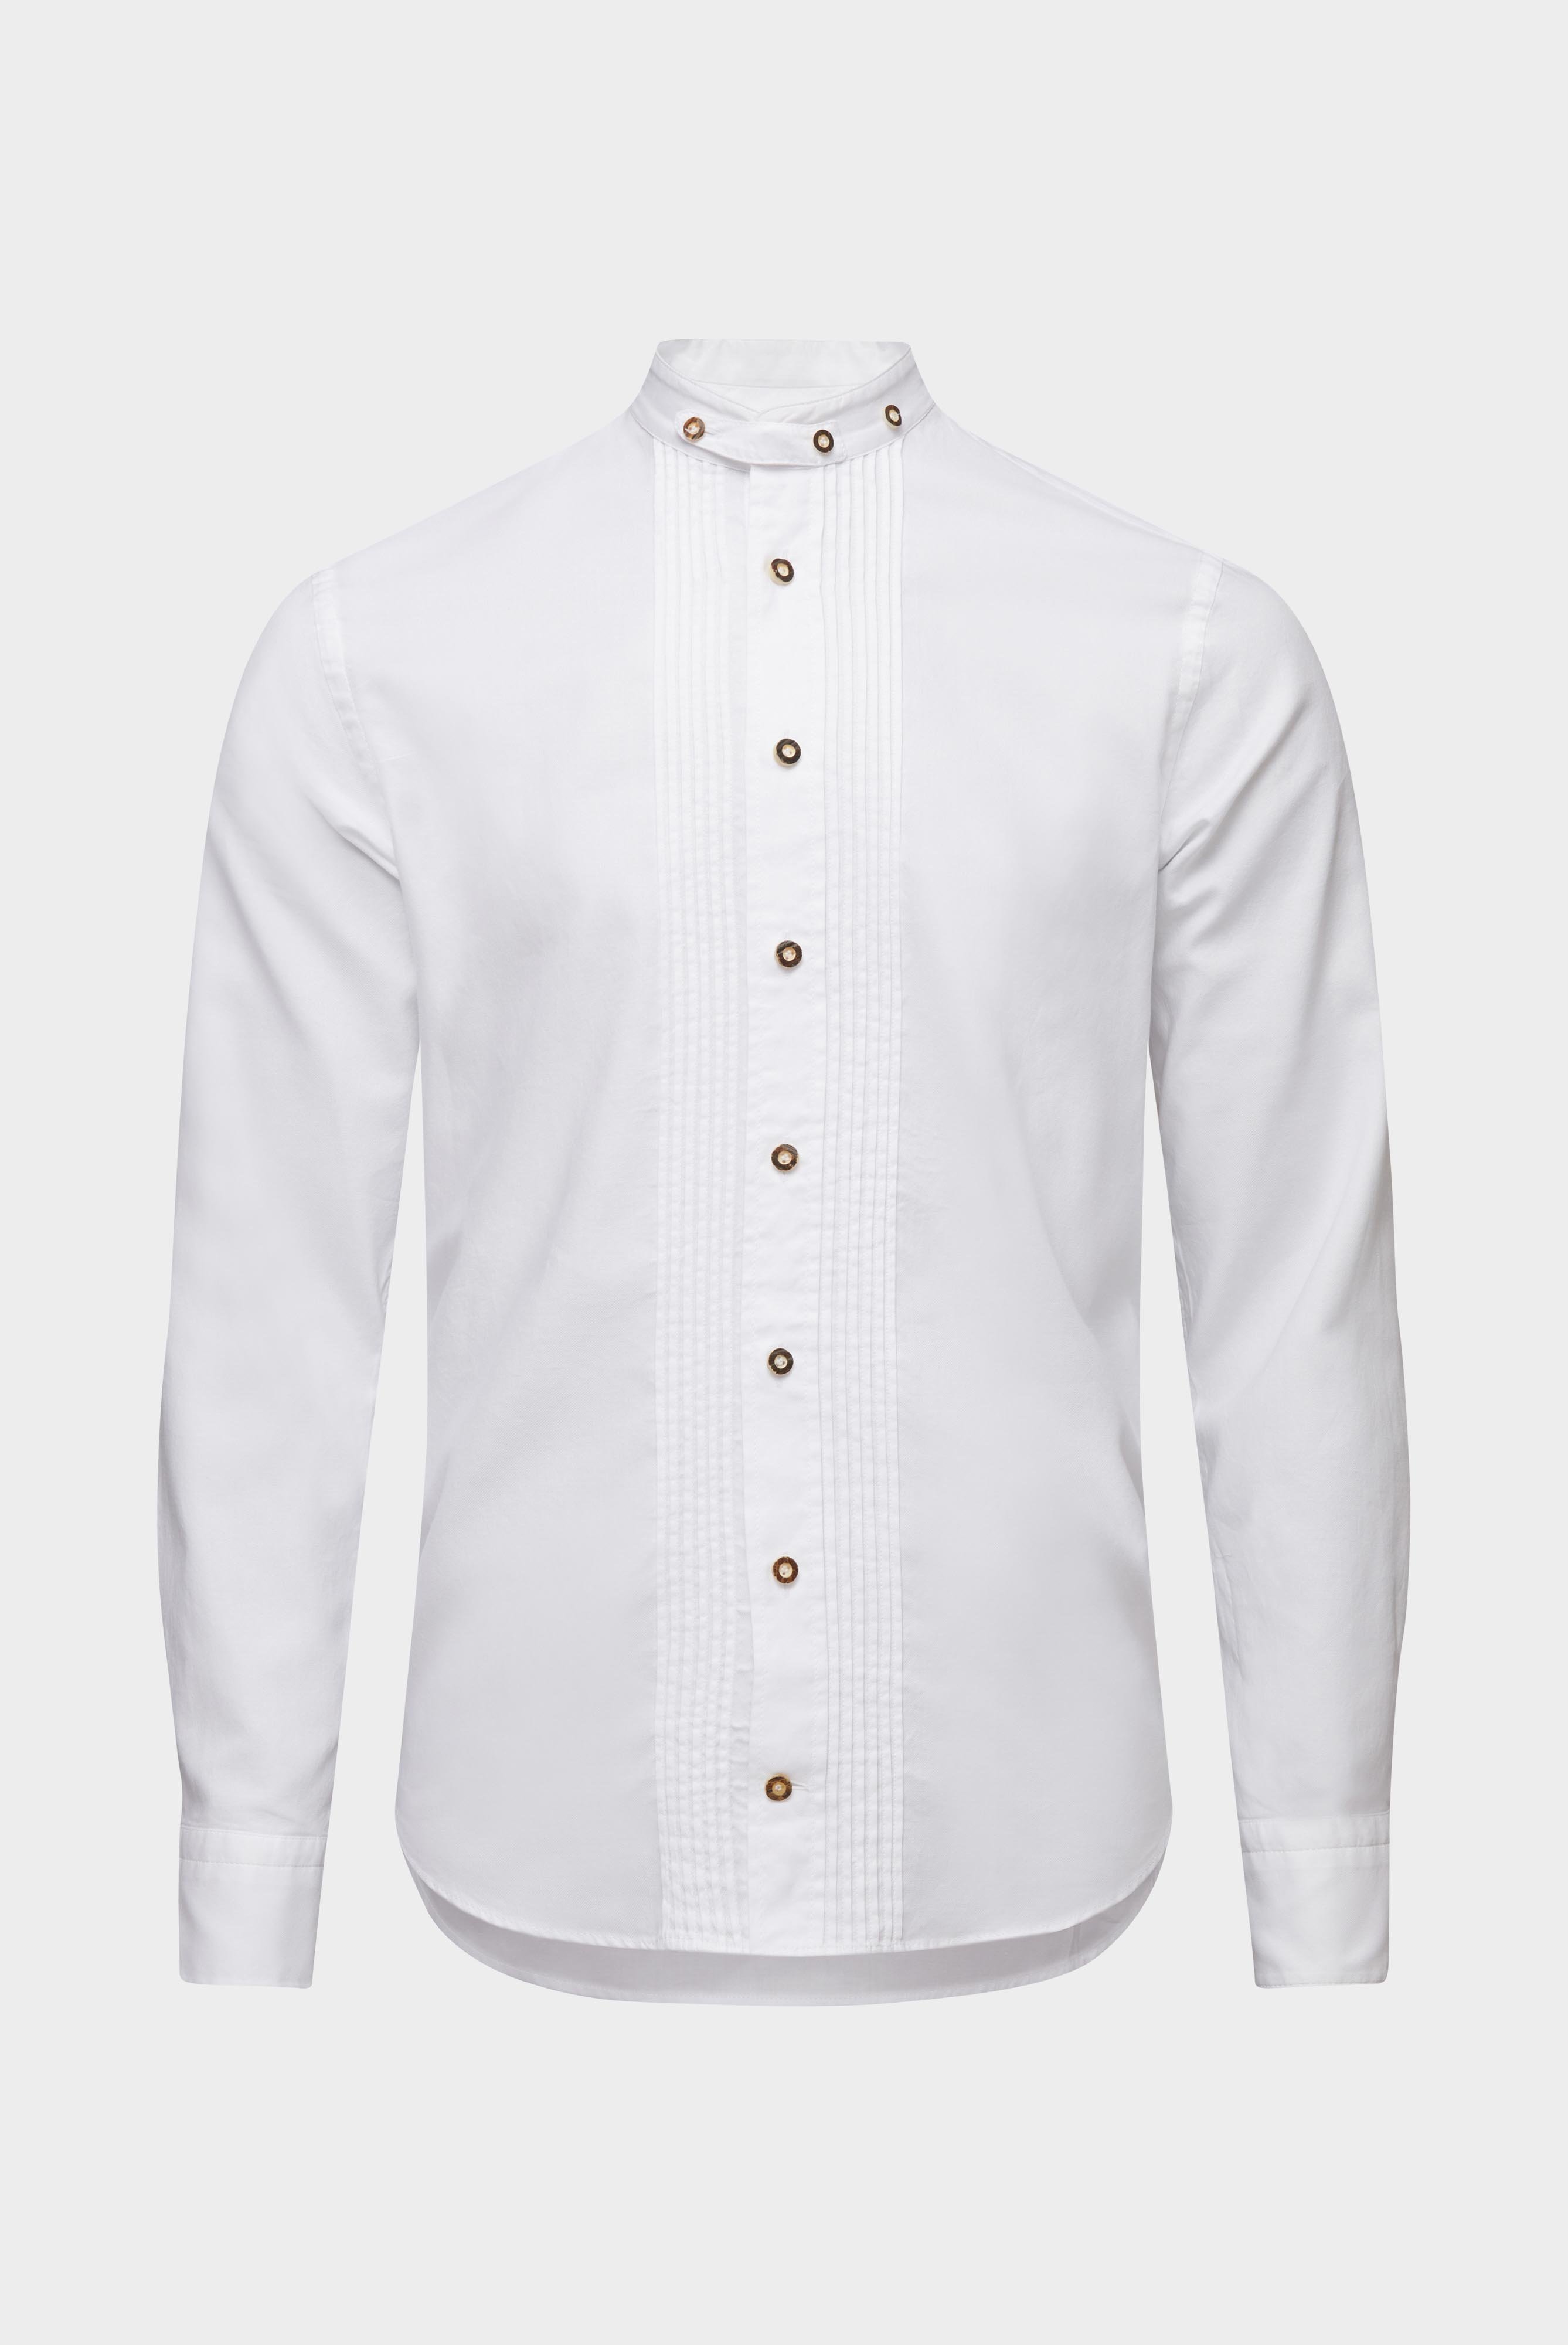 Plain Pin Point Oxford Pleated Traditional Shirt